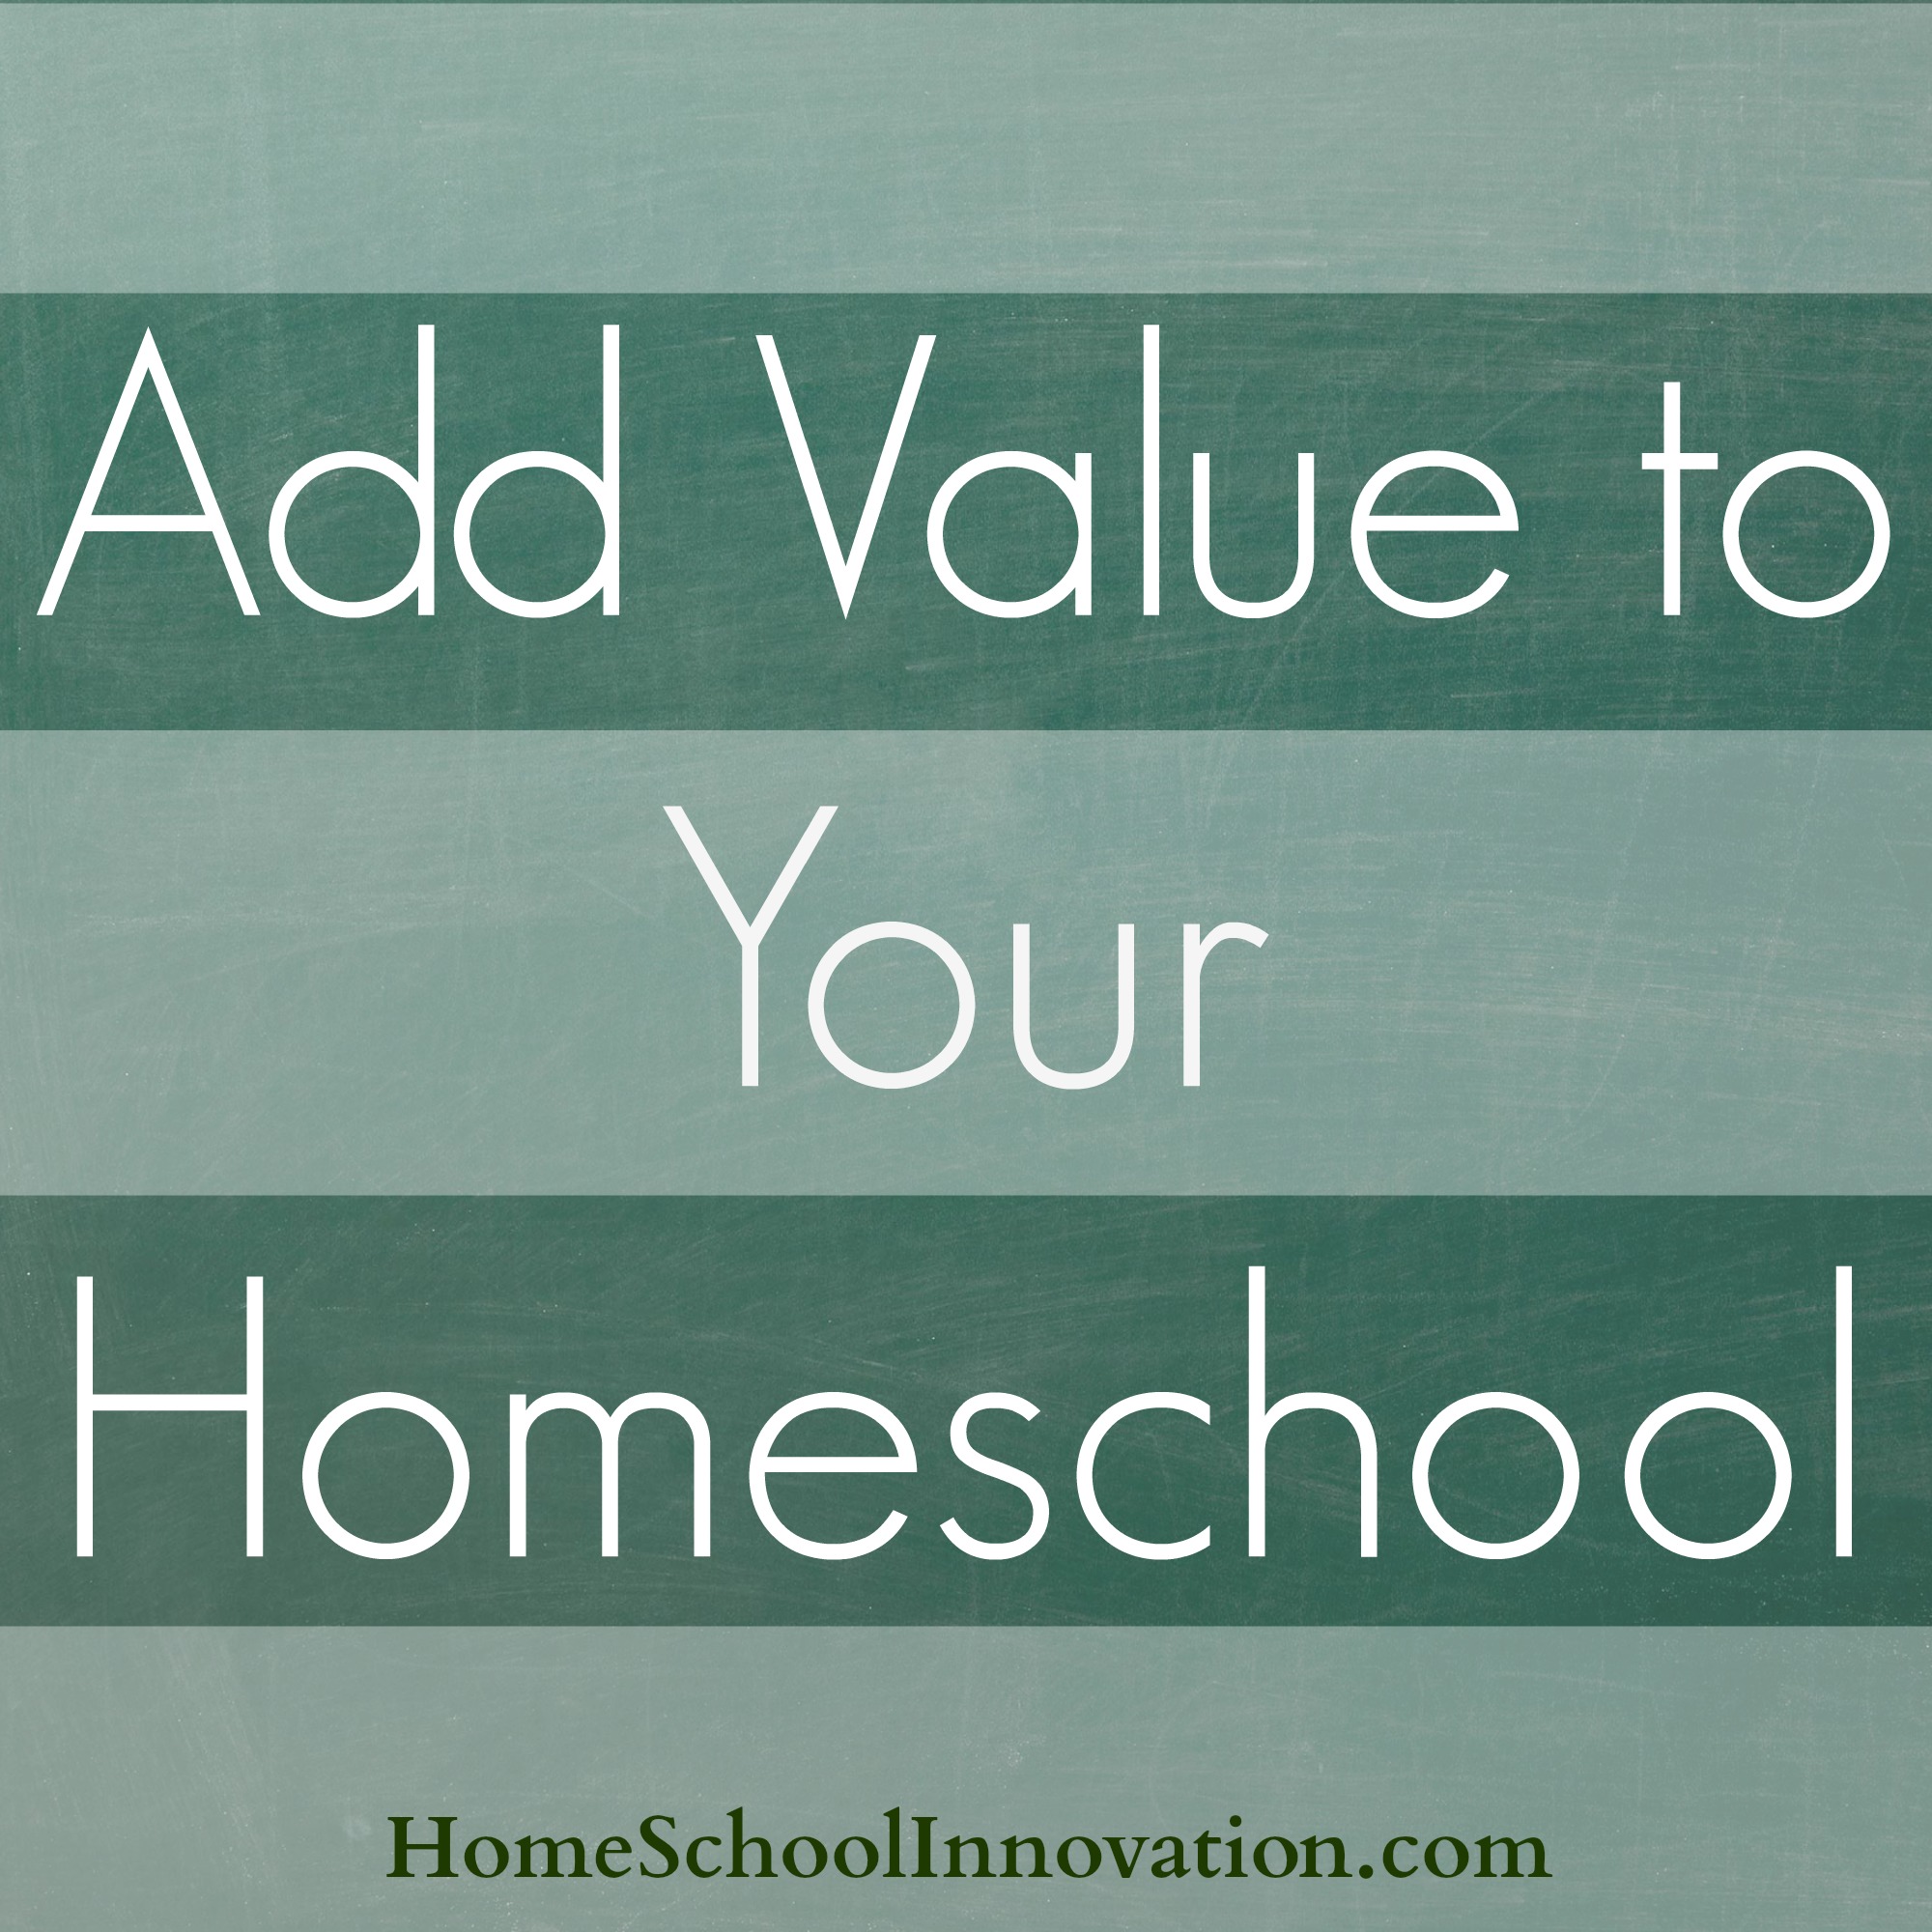 Add Value to Your Homeschool